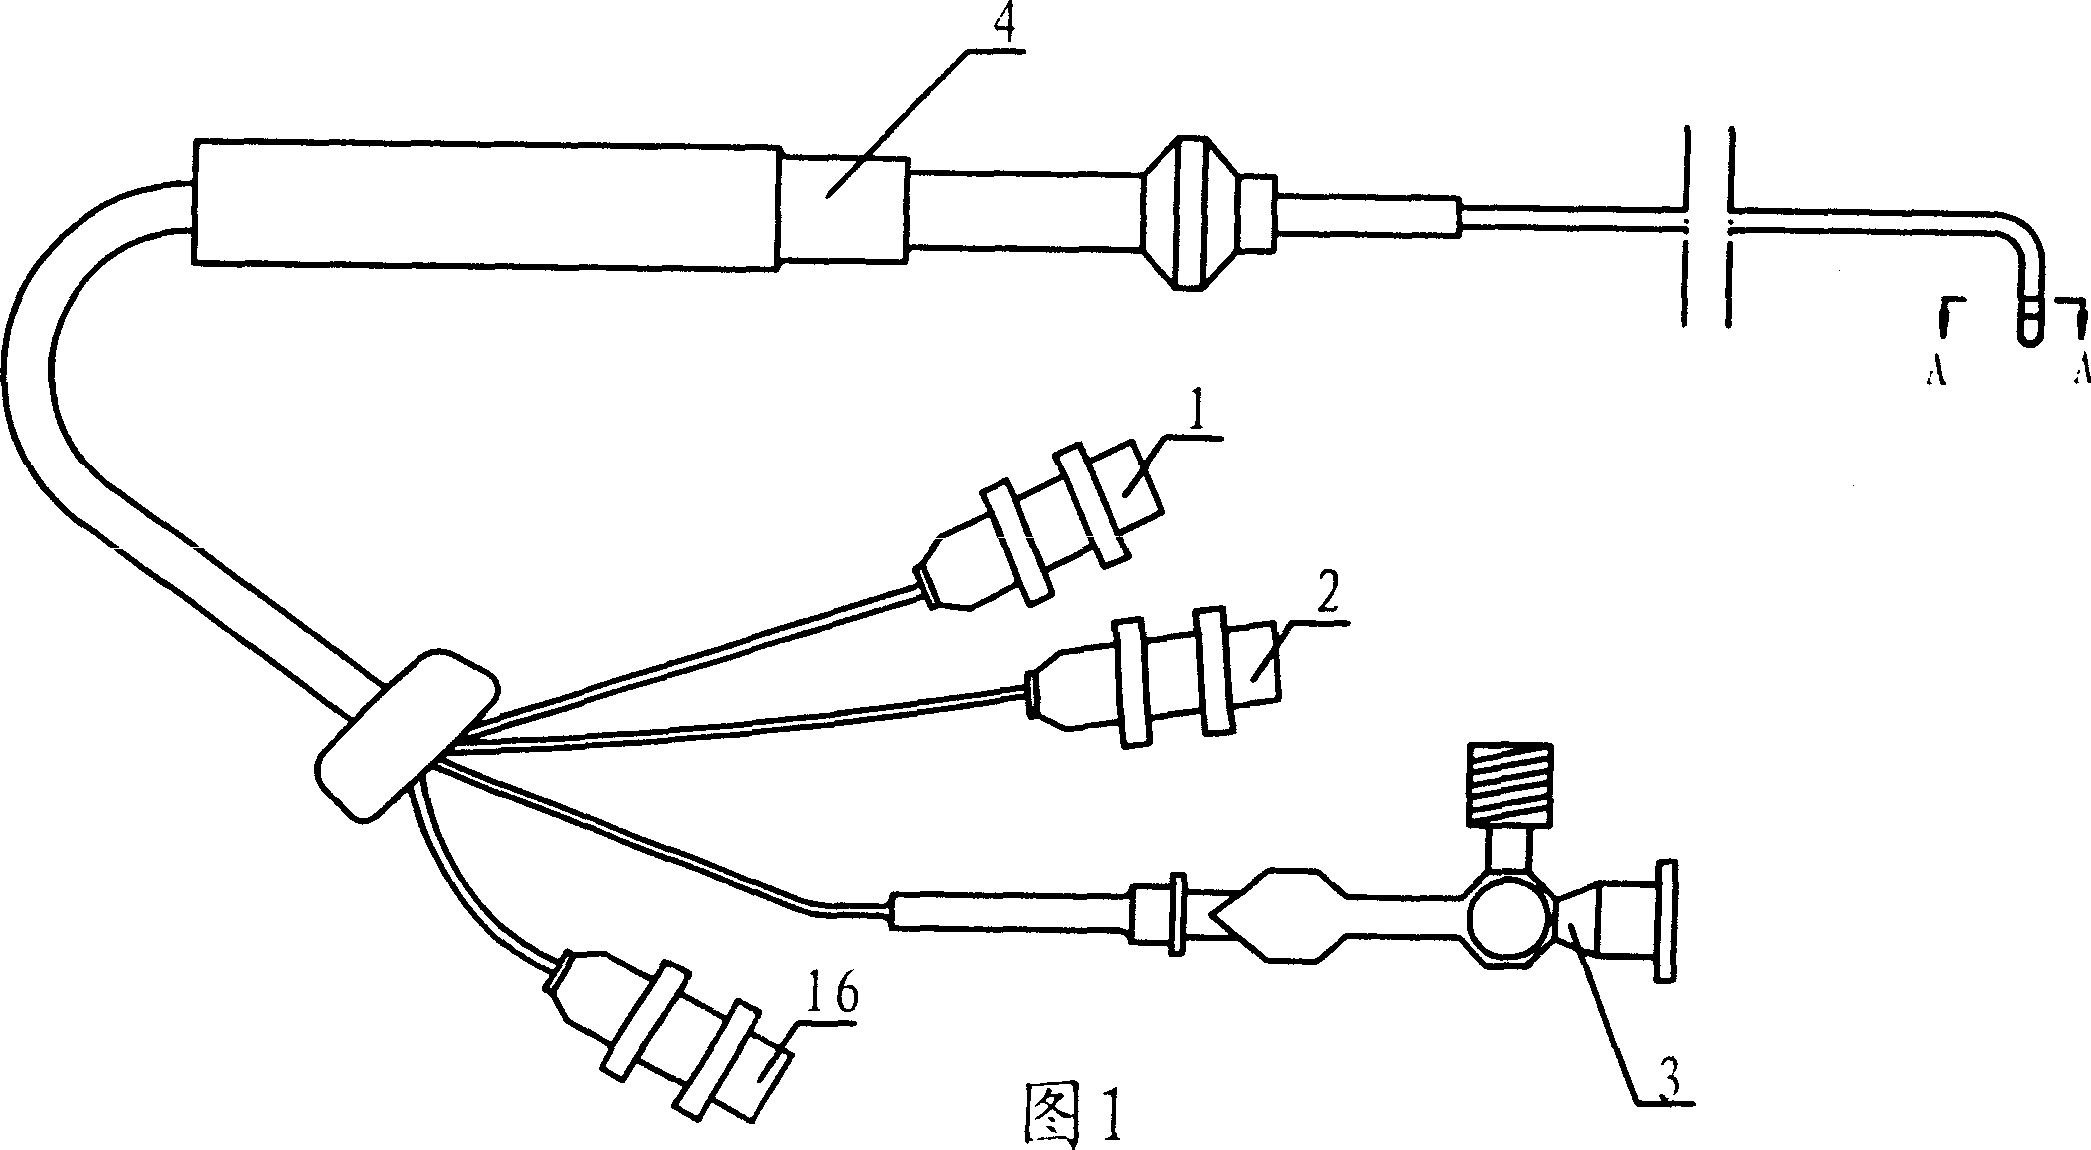 Insertion type ultrasonic locating delivering and irradiating method and insertion type ultrasonic locating injection and irradiation instrument